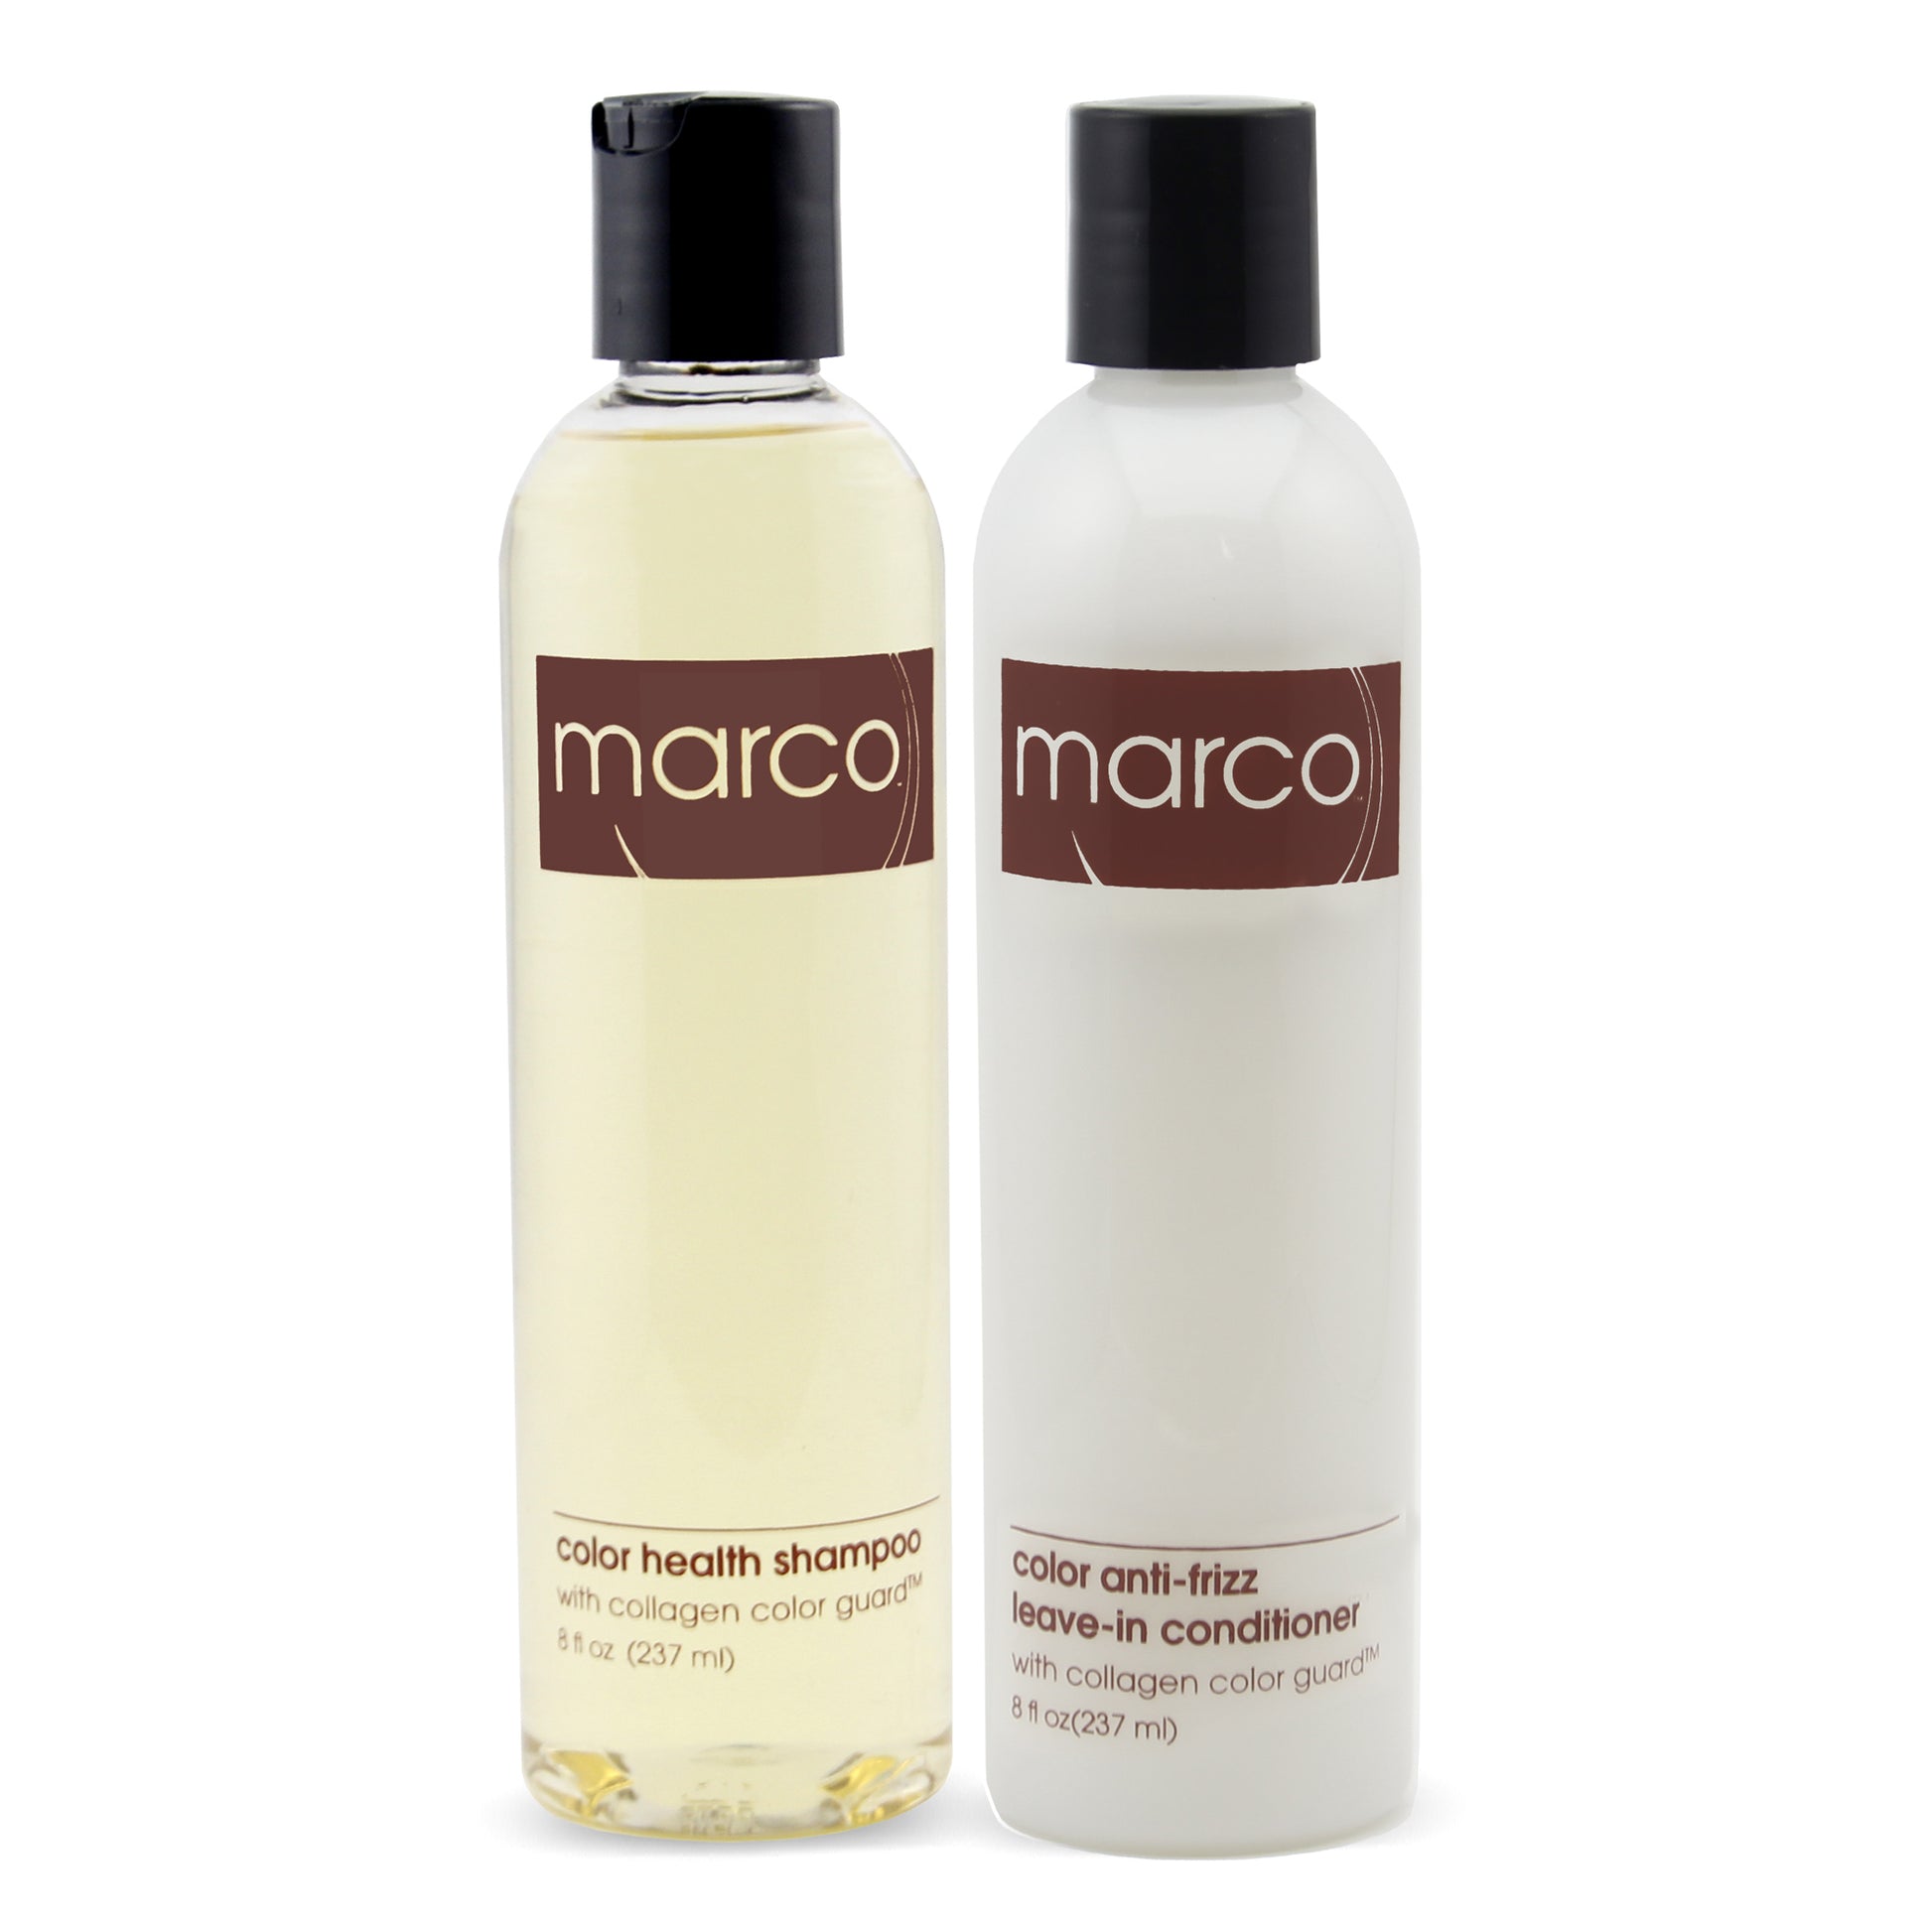 Two bottles, Marco color health shampoo and anti-frizz leave-in conditioner with collagen color guard